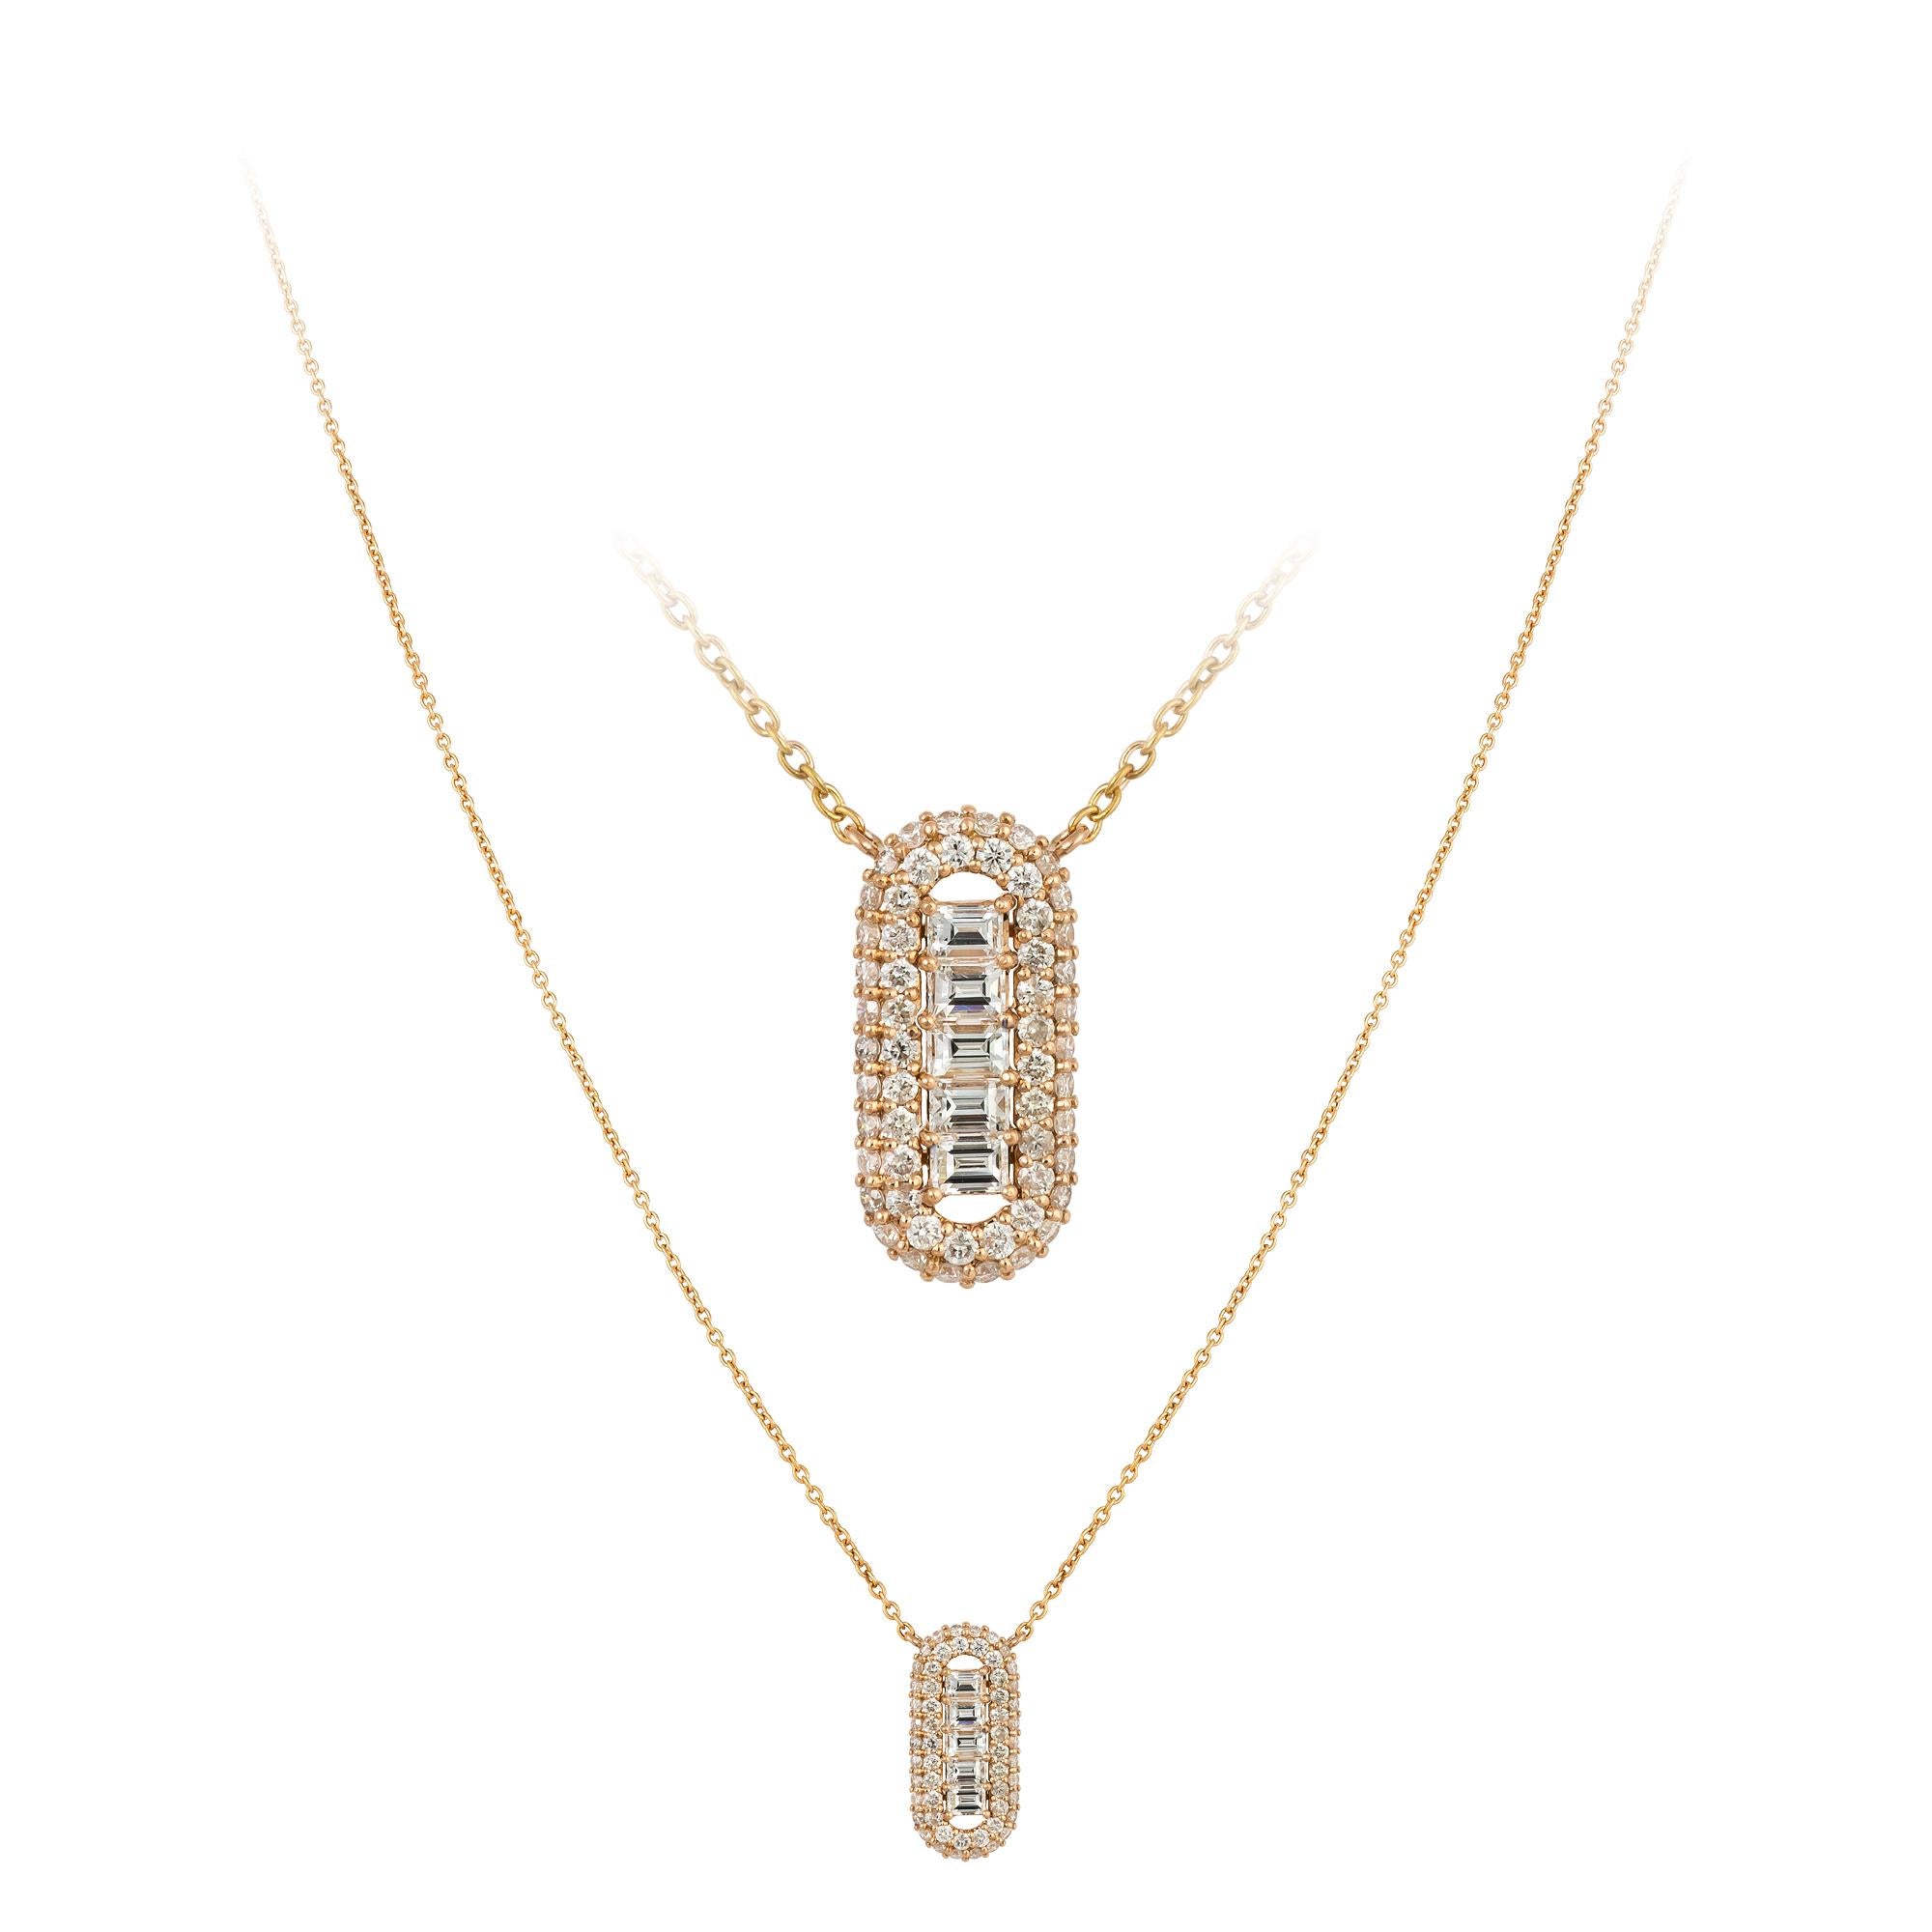 NECKLACE 18K Pink Gold Diamond 0.55 Cts/55 Pcs Tapered Baguette 0.39 Cts/5 Pcs
